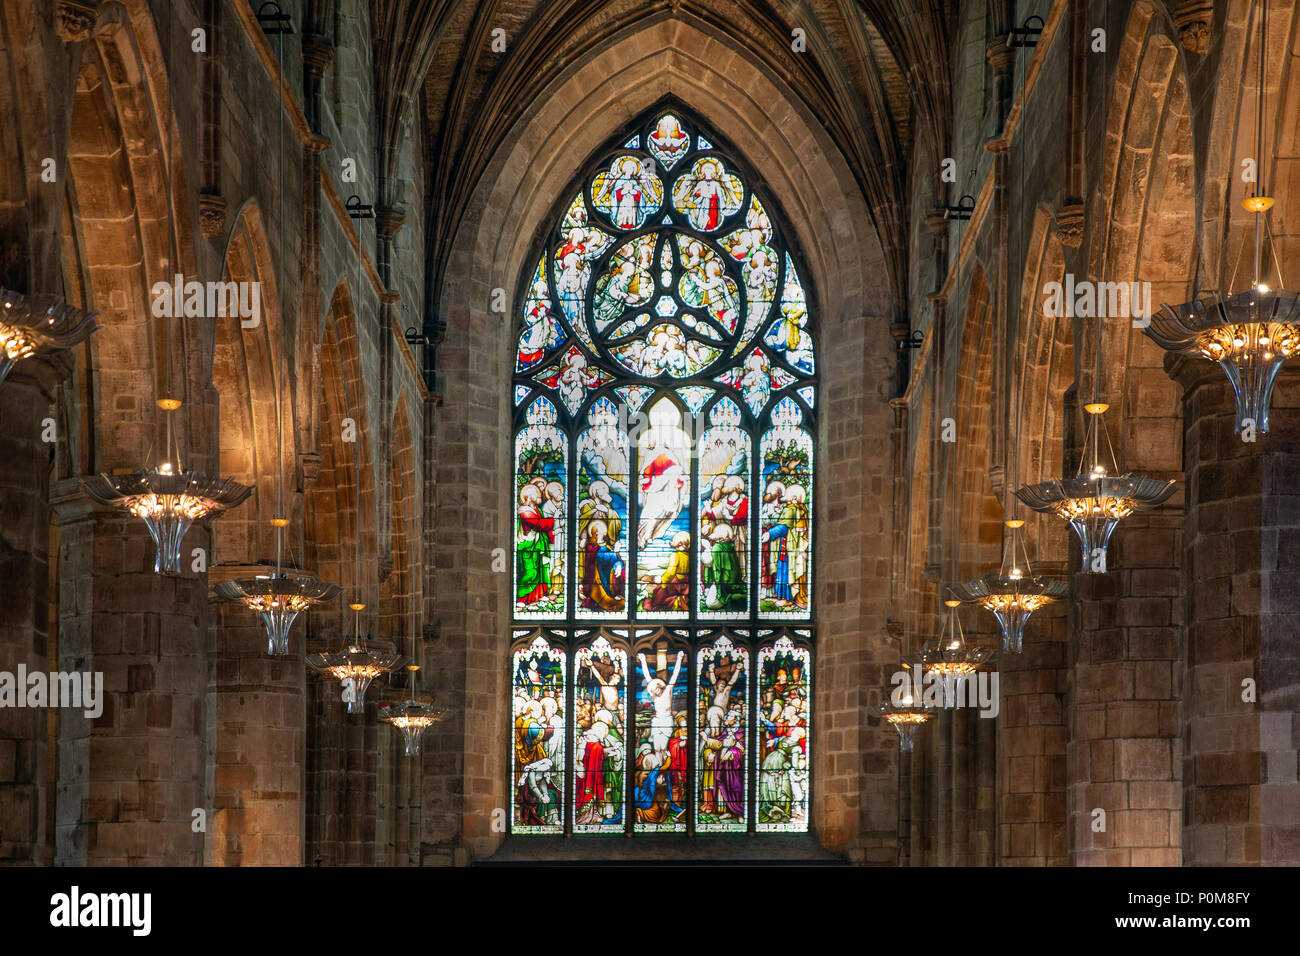 Interior St. Giles Cathedral in Edinburgh with stained glass window Stock Photo